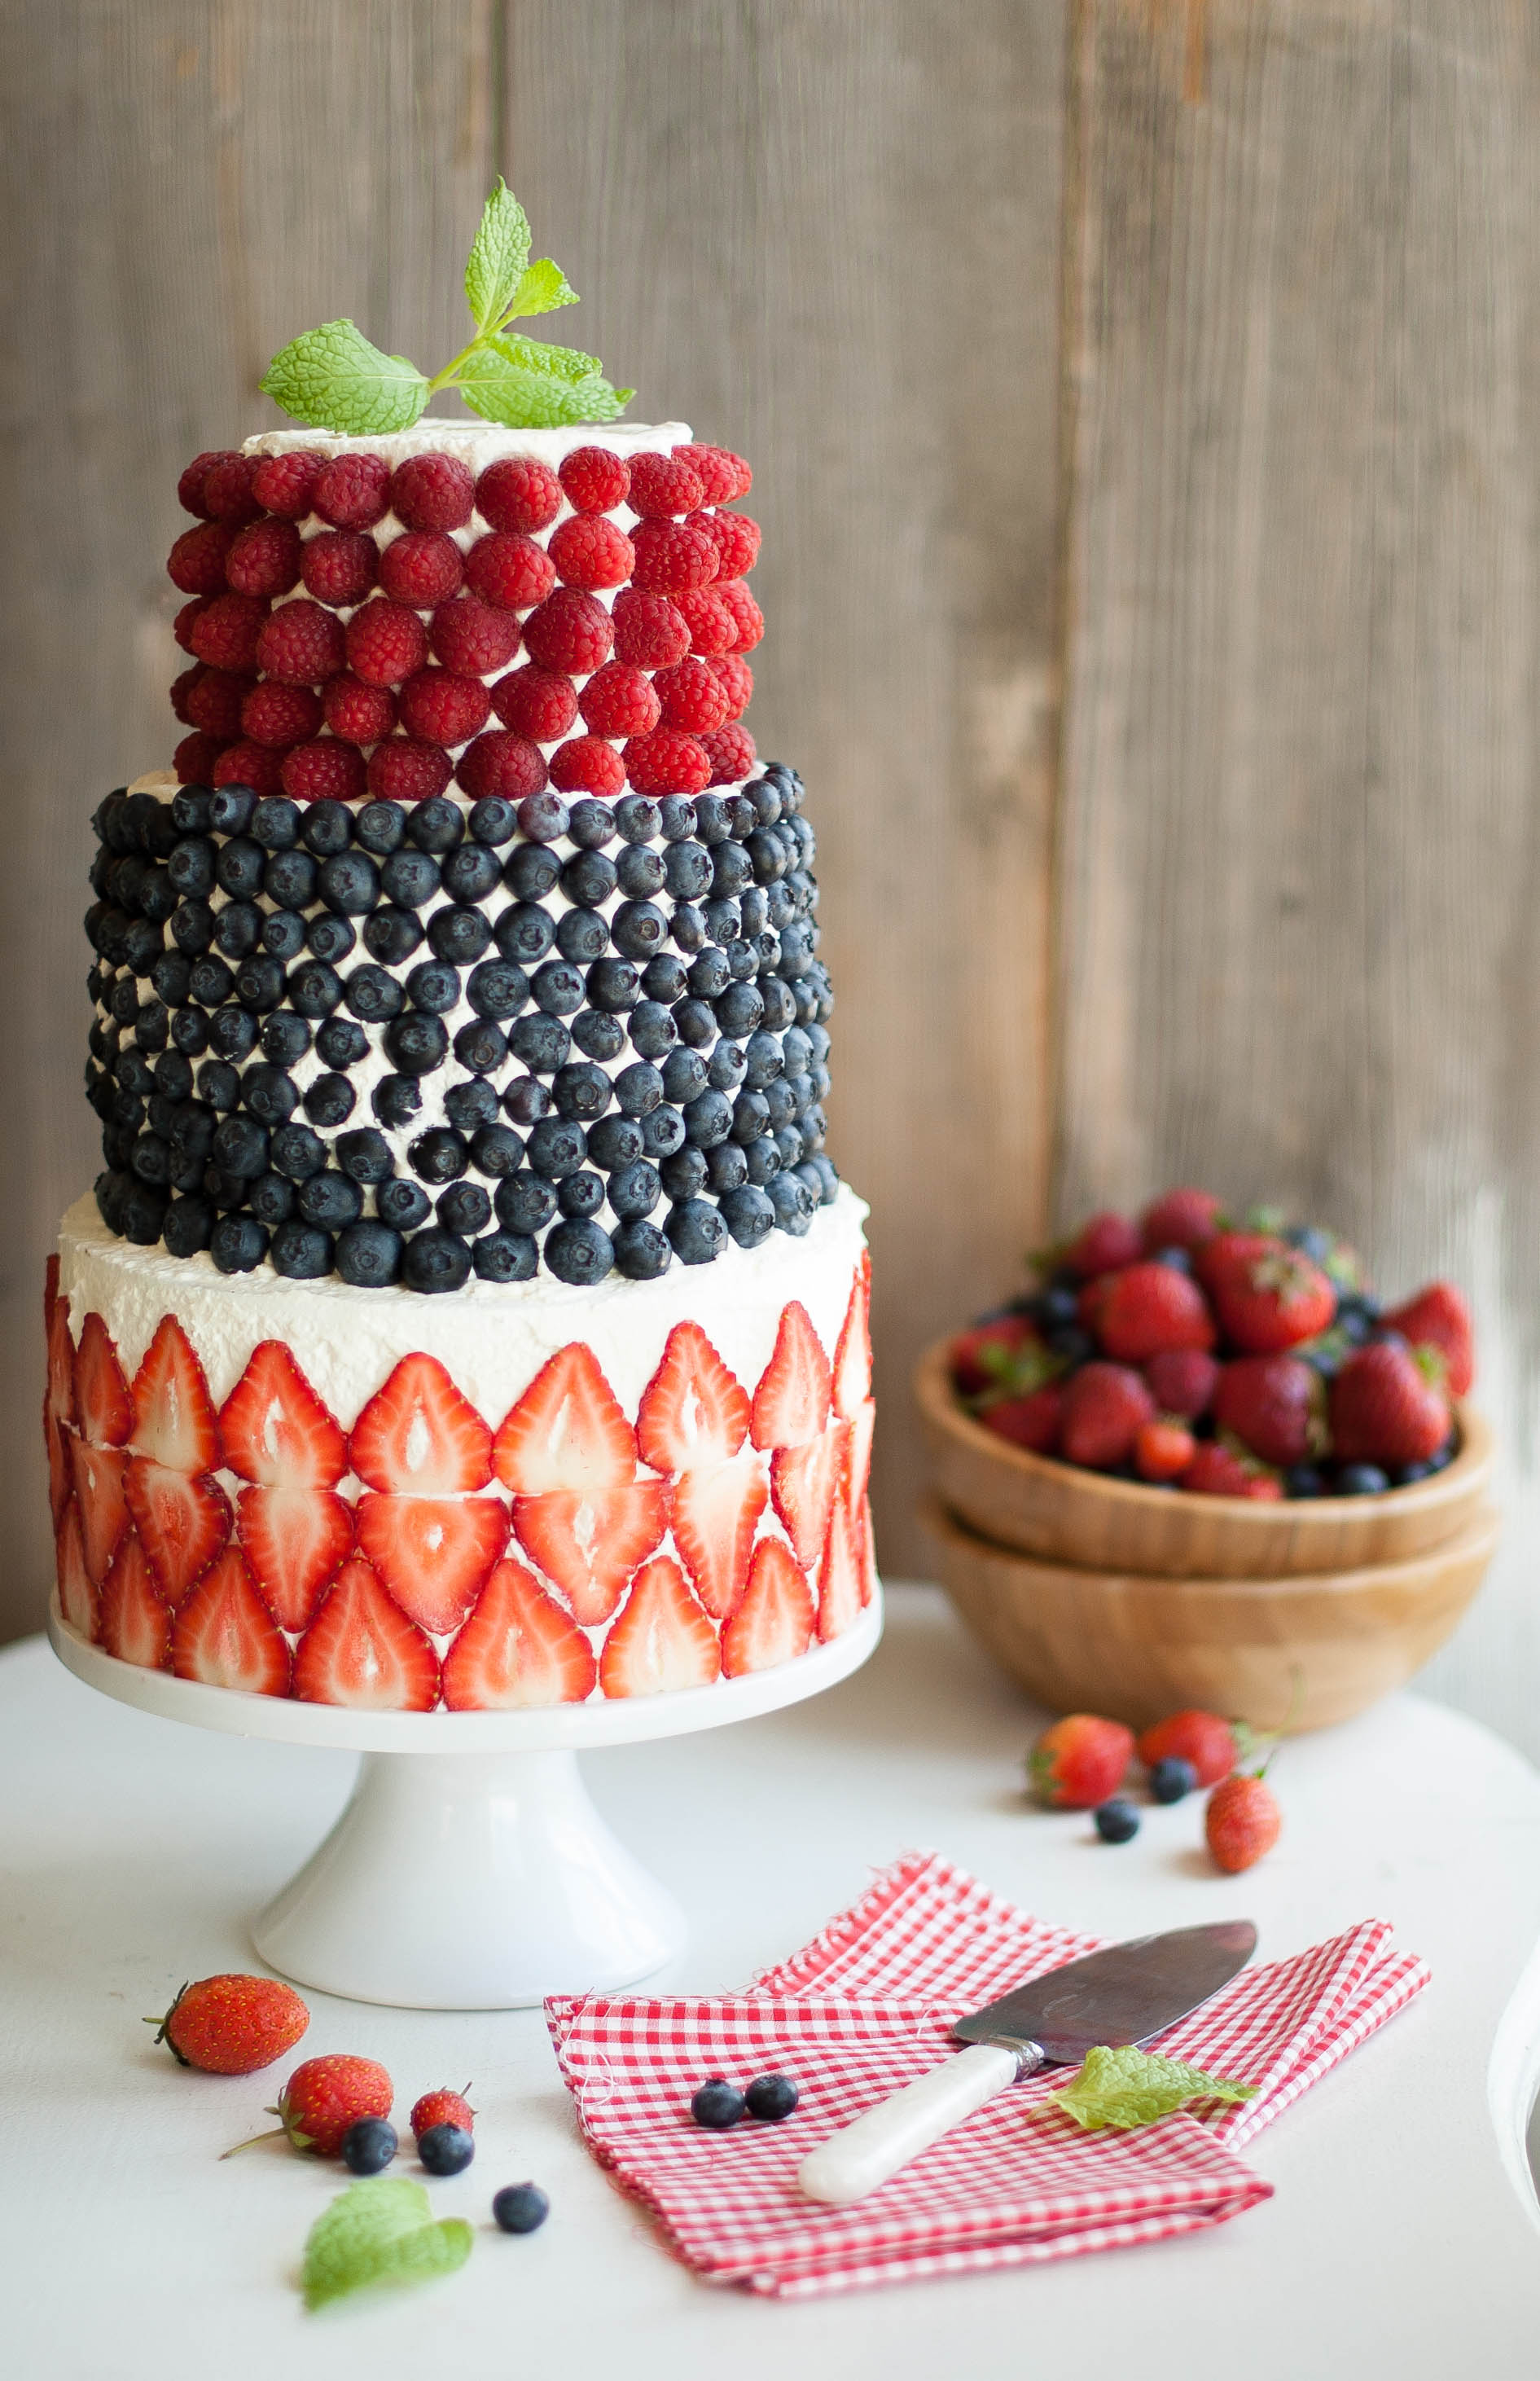 How to sugar branches and berries for cakes and cupcakes » The Hutch Oven